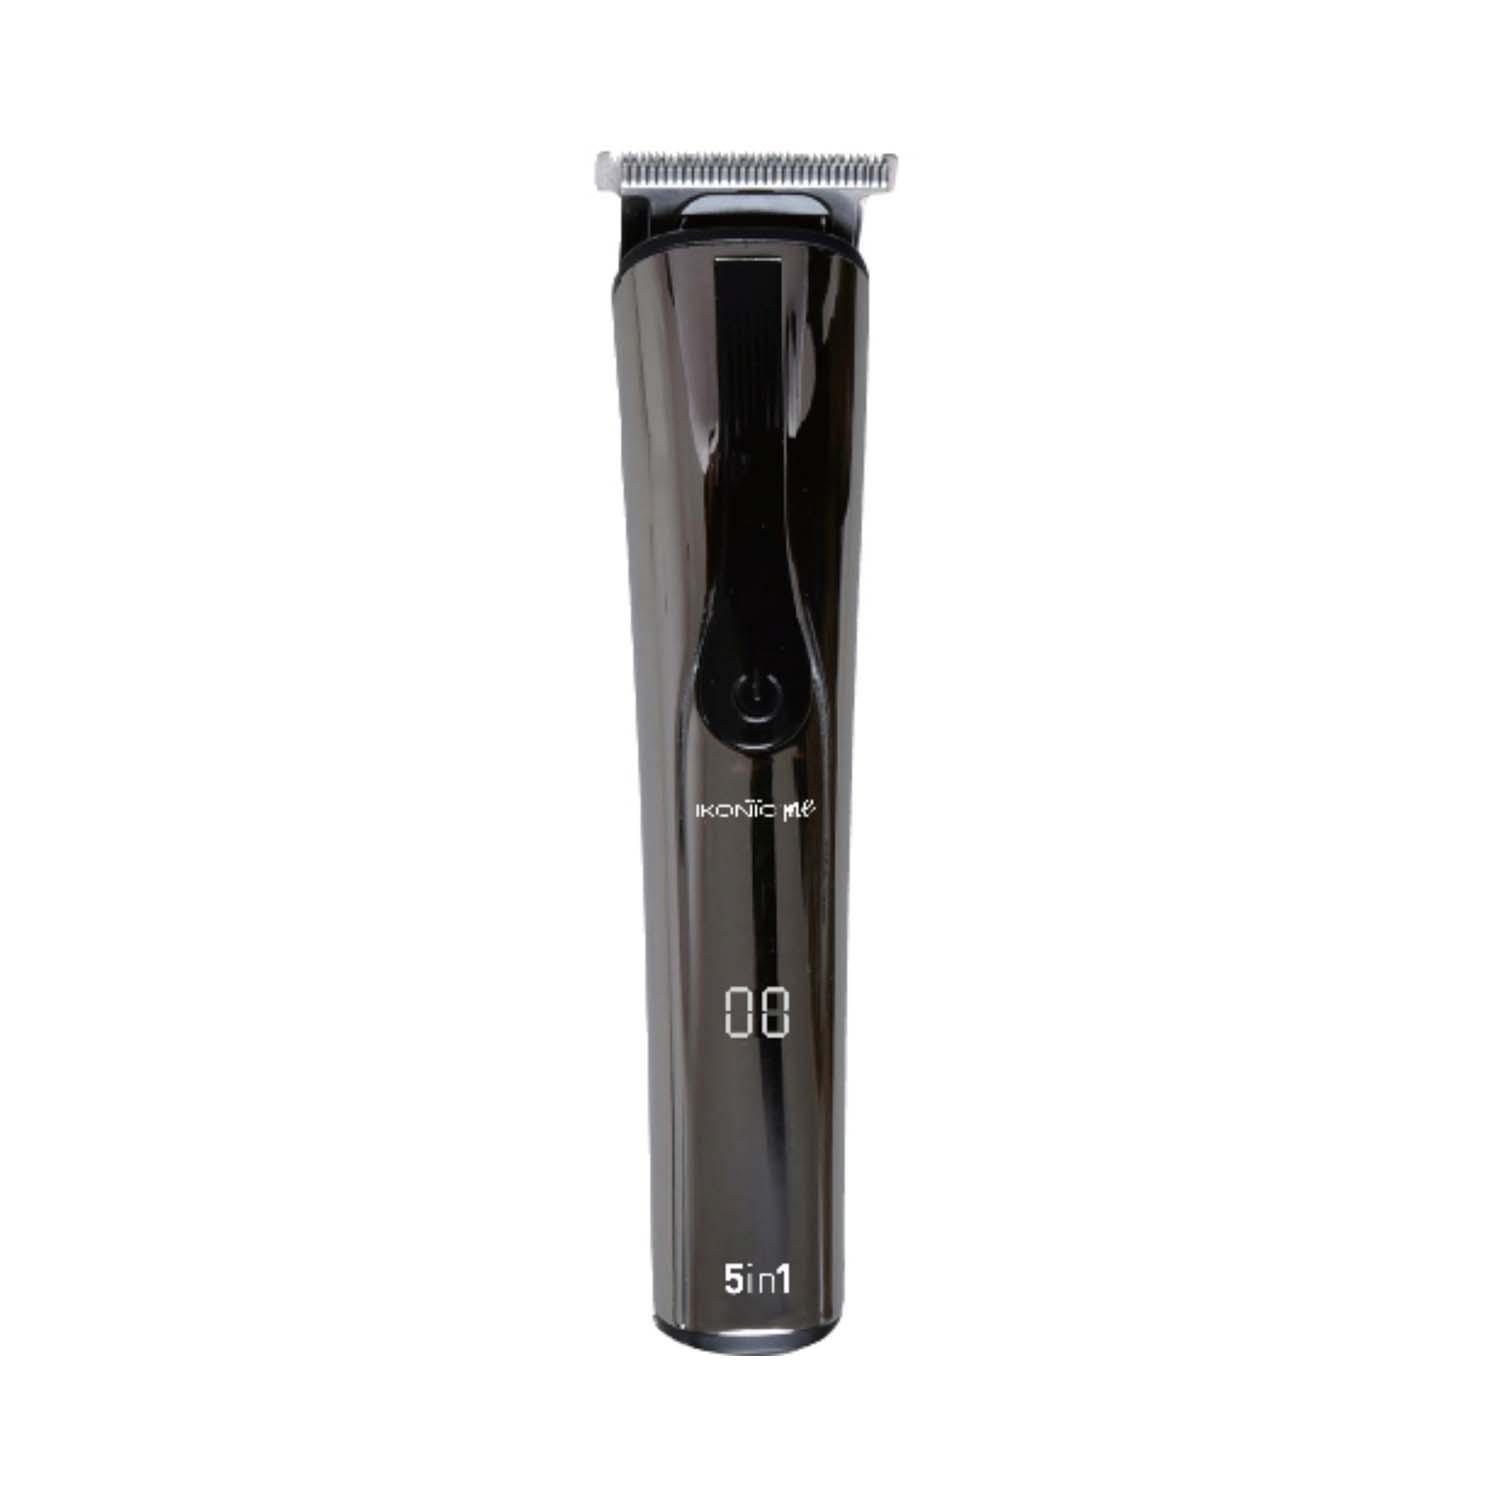 Ikonic Professional | Ikonic Professional Me 5 In 1 Express Groomer Trimmer